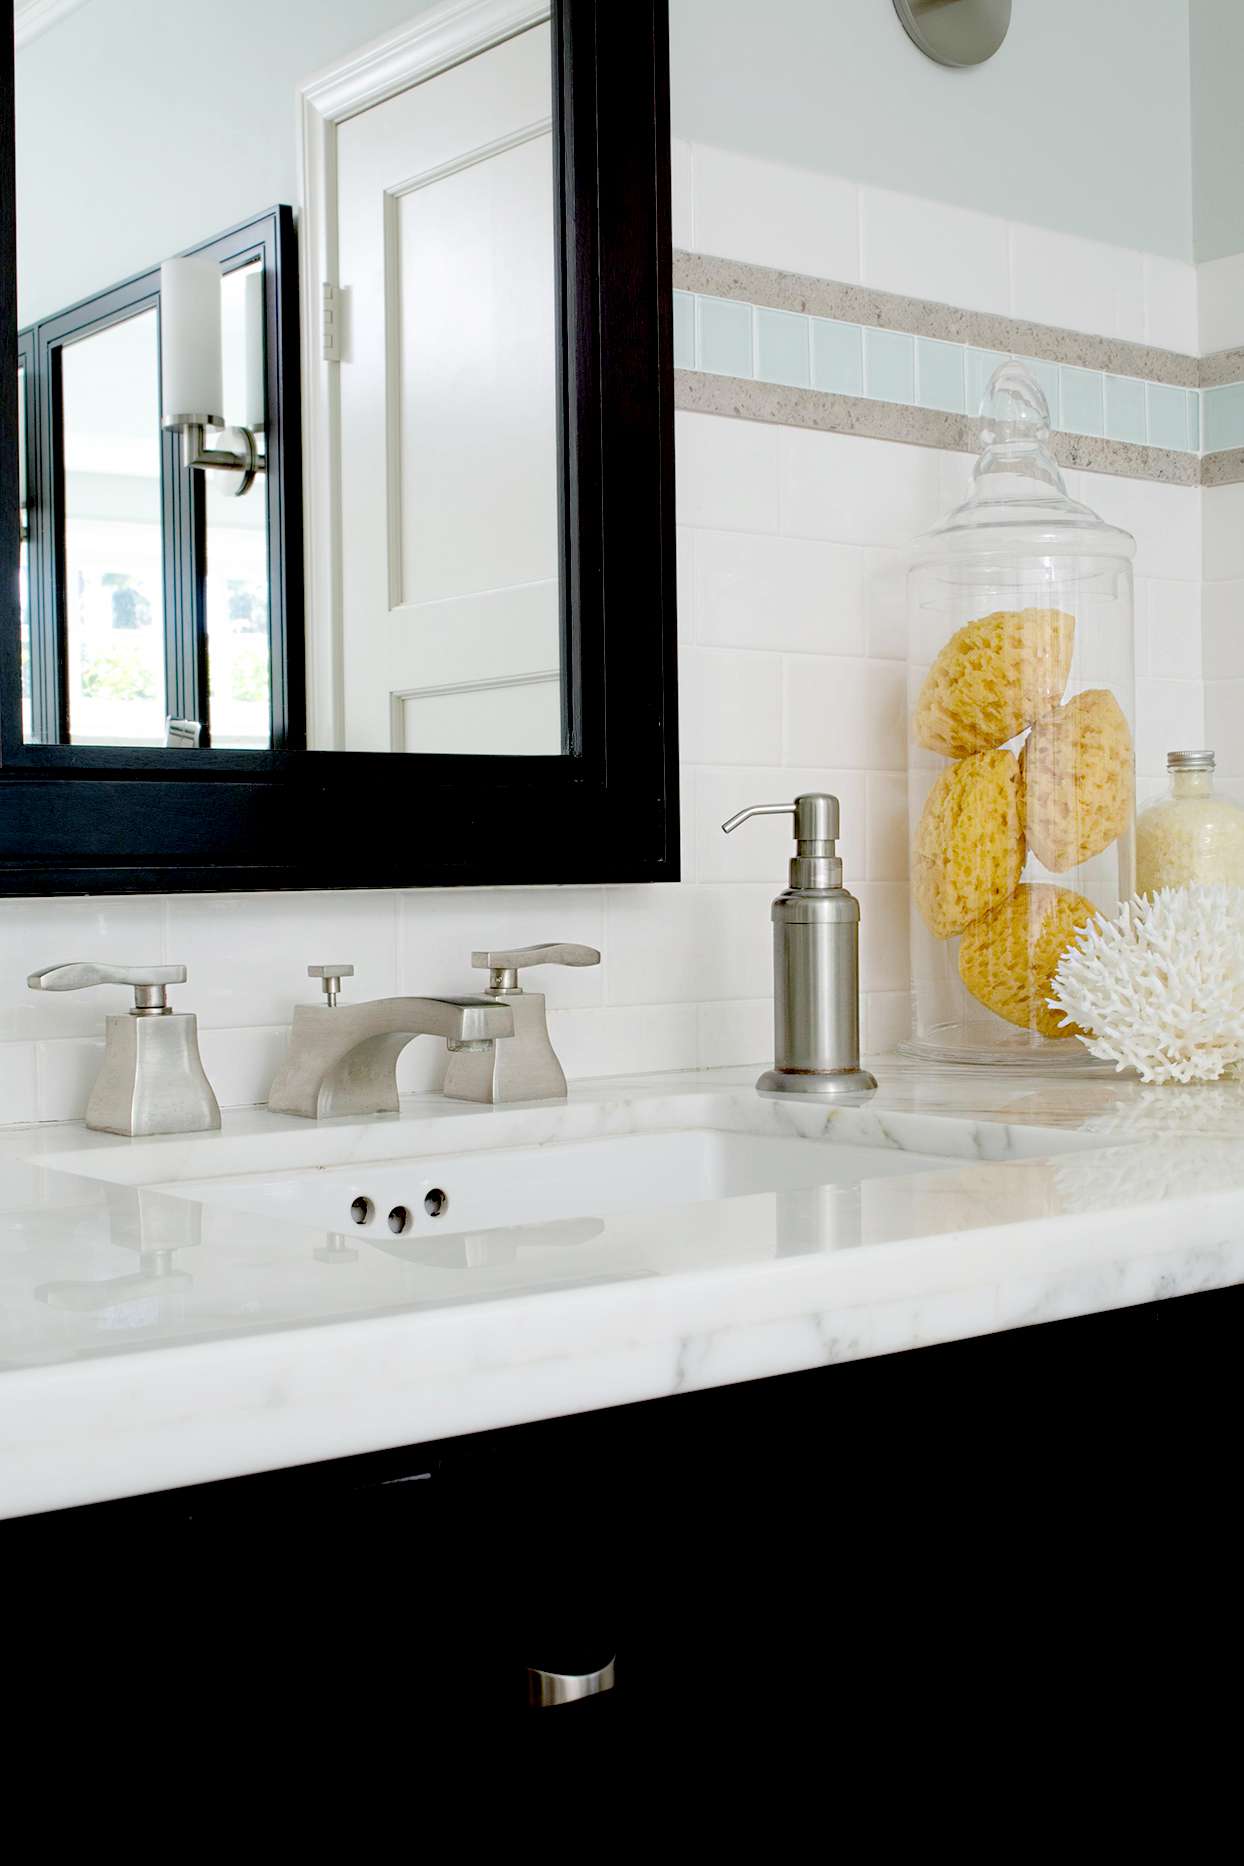 Marble bathroom sink with glass container and sponges